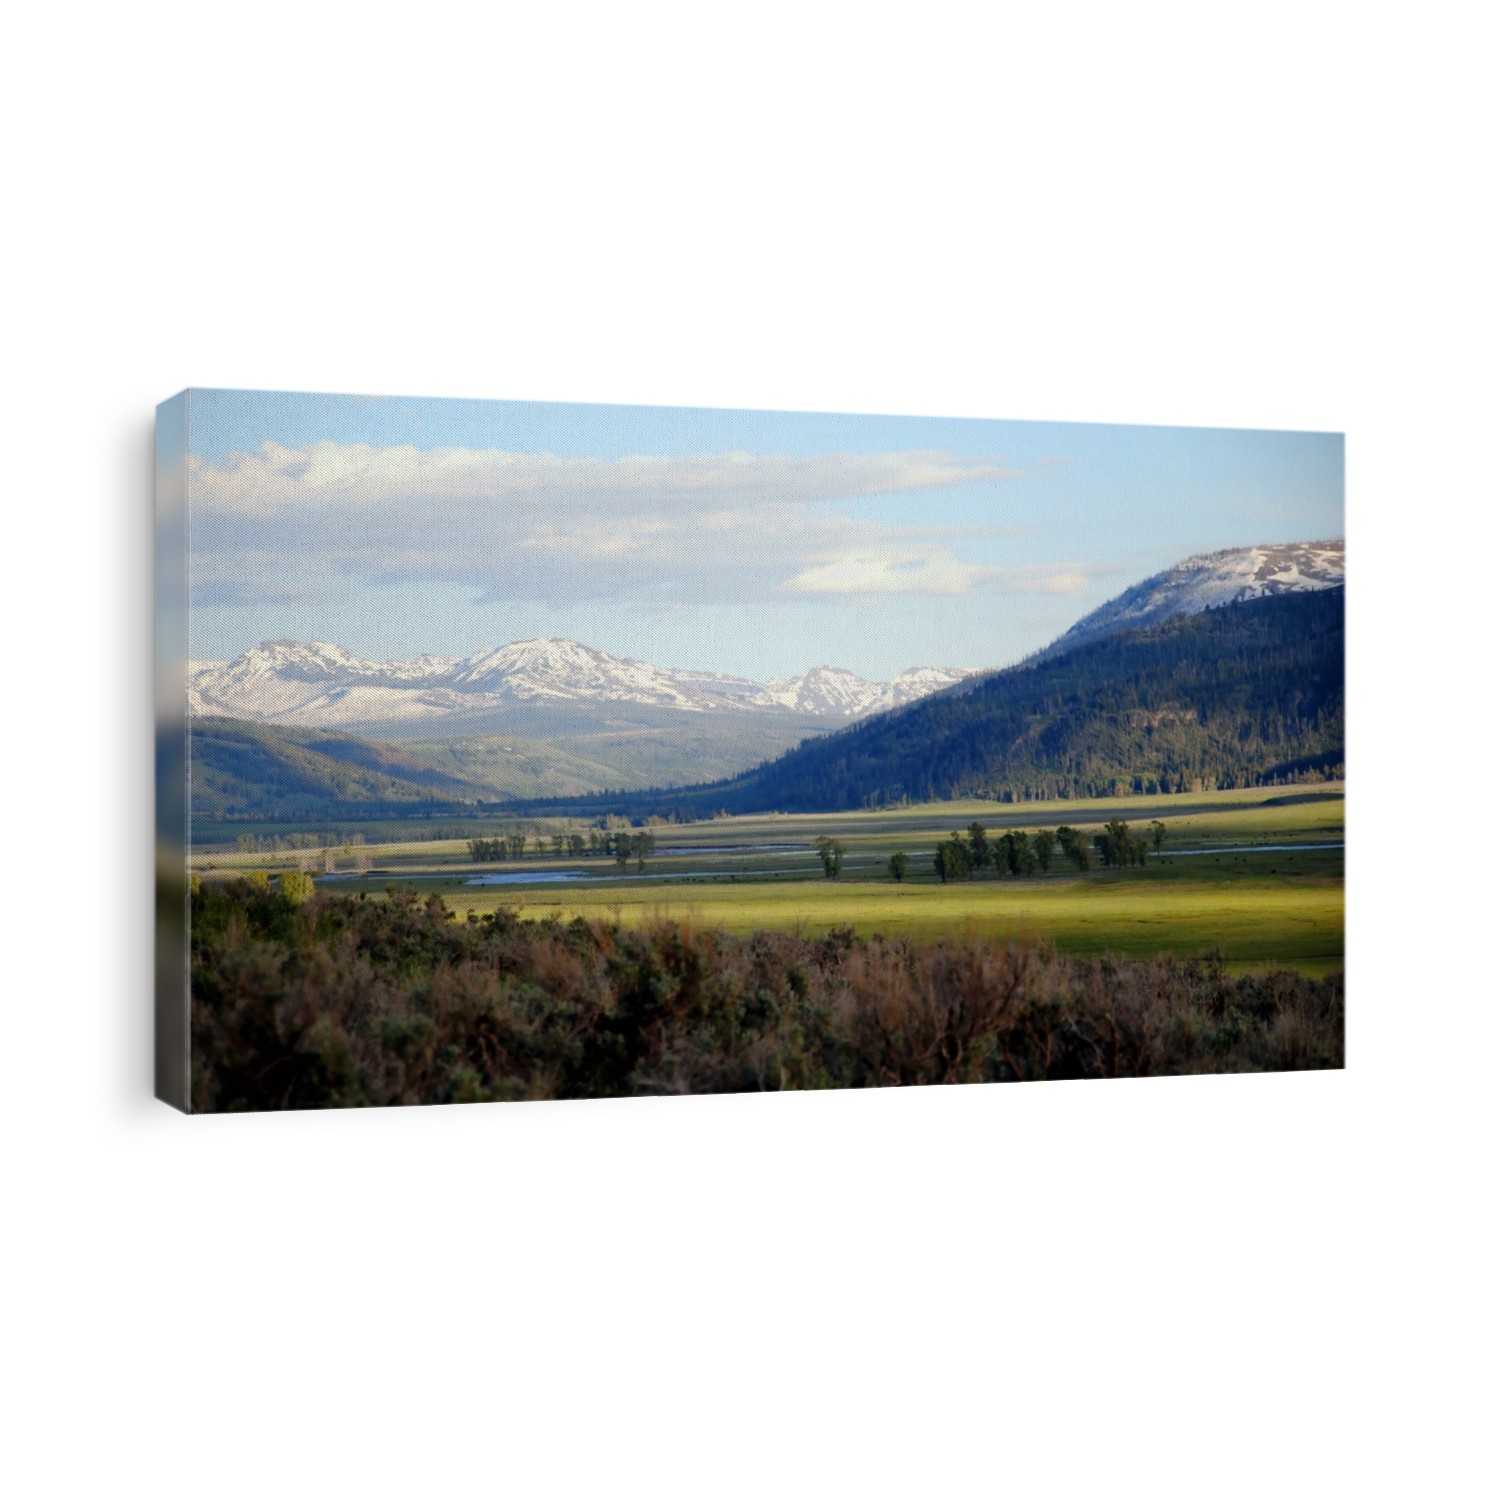 Lamar valley in Yellowstone National Park, with Lamar river, herds of bison grazing in green fields against a background of snow capped mountains and blue sky with white clouds